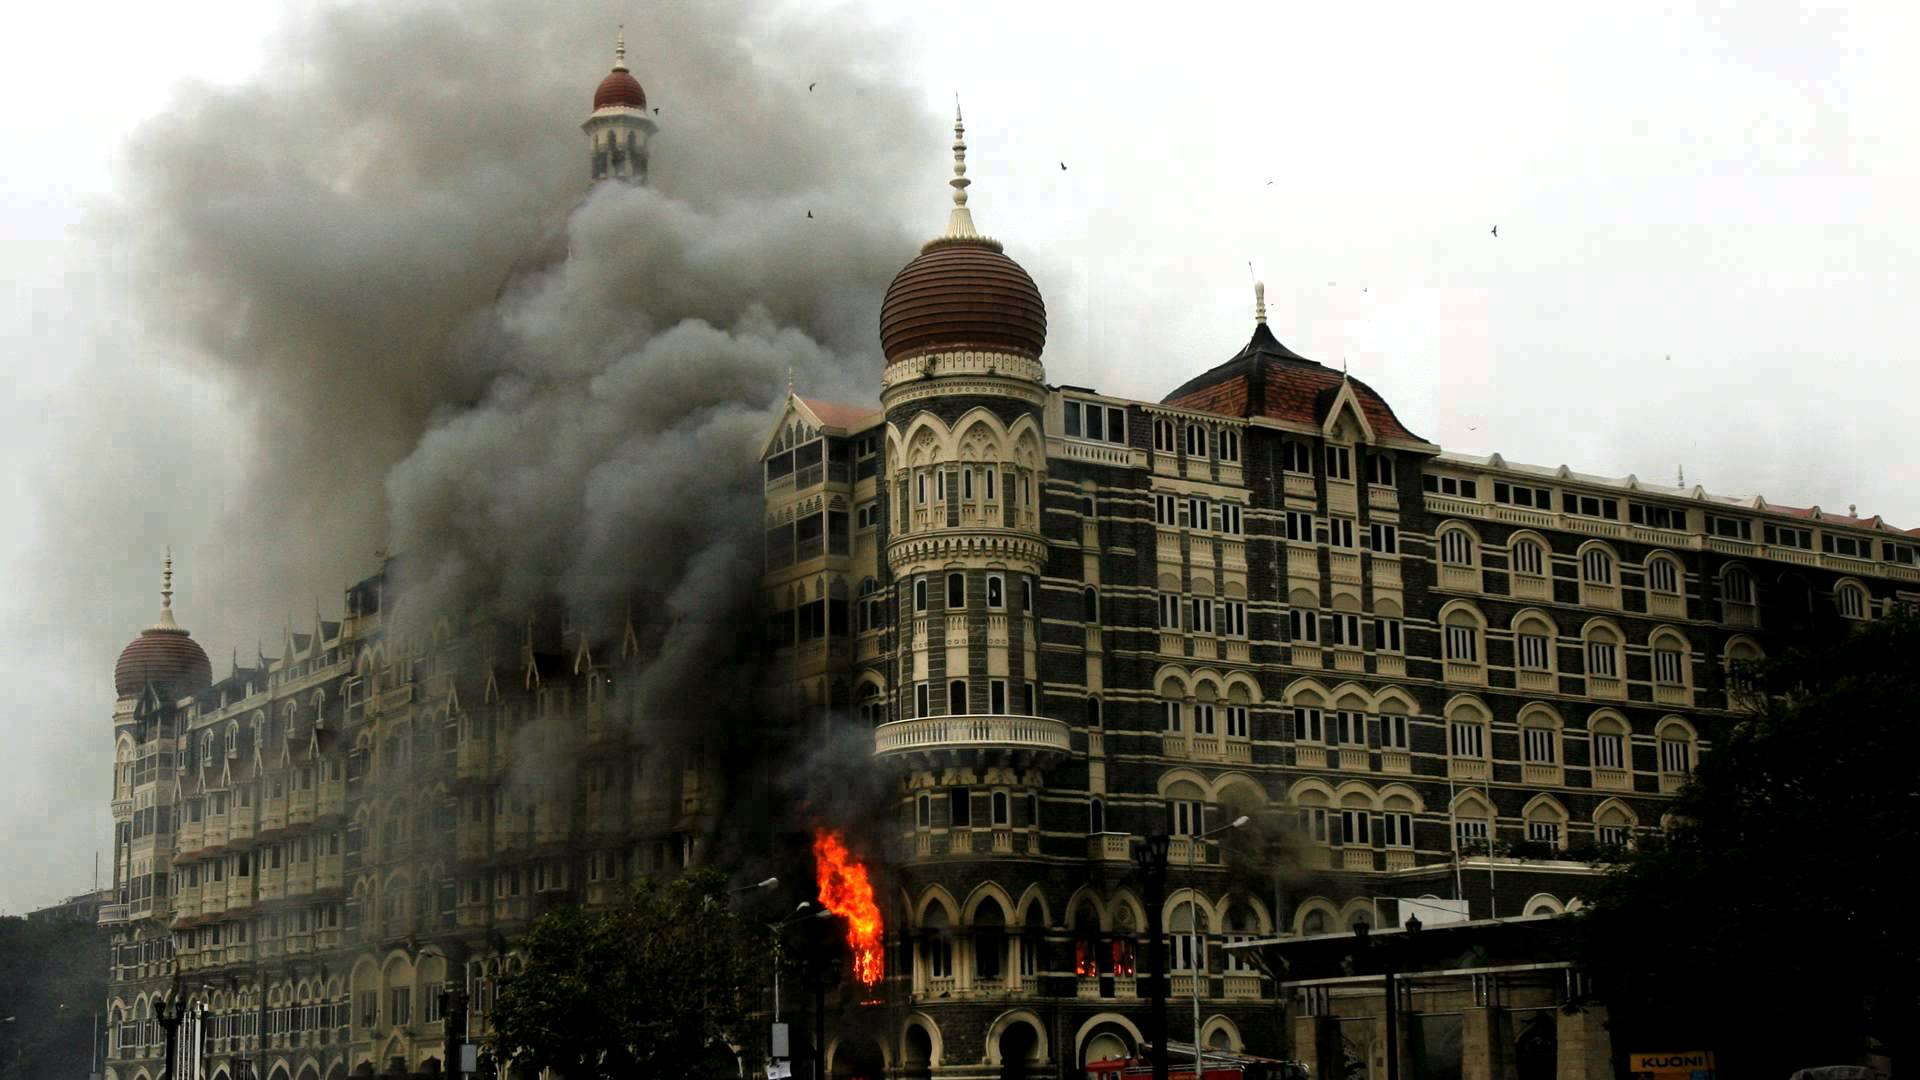 Top MHA Officials 'holidaying' in Pakistan during 26/11